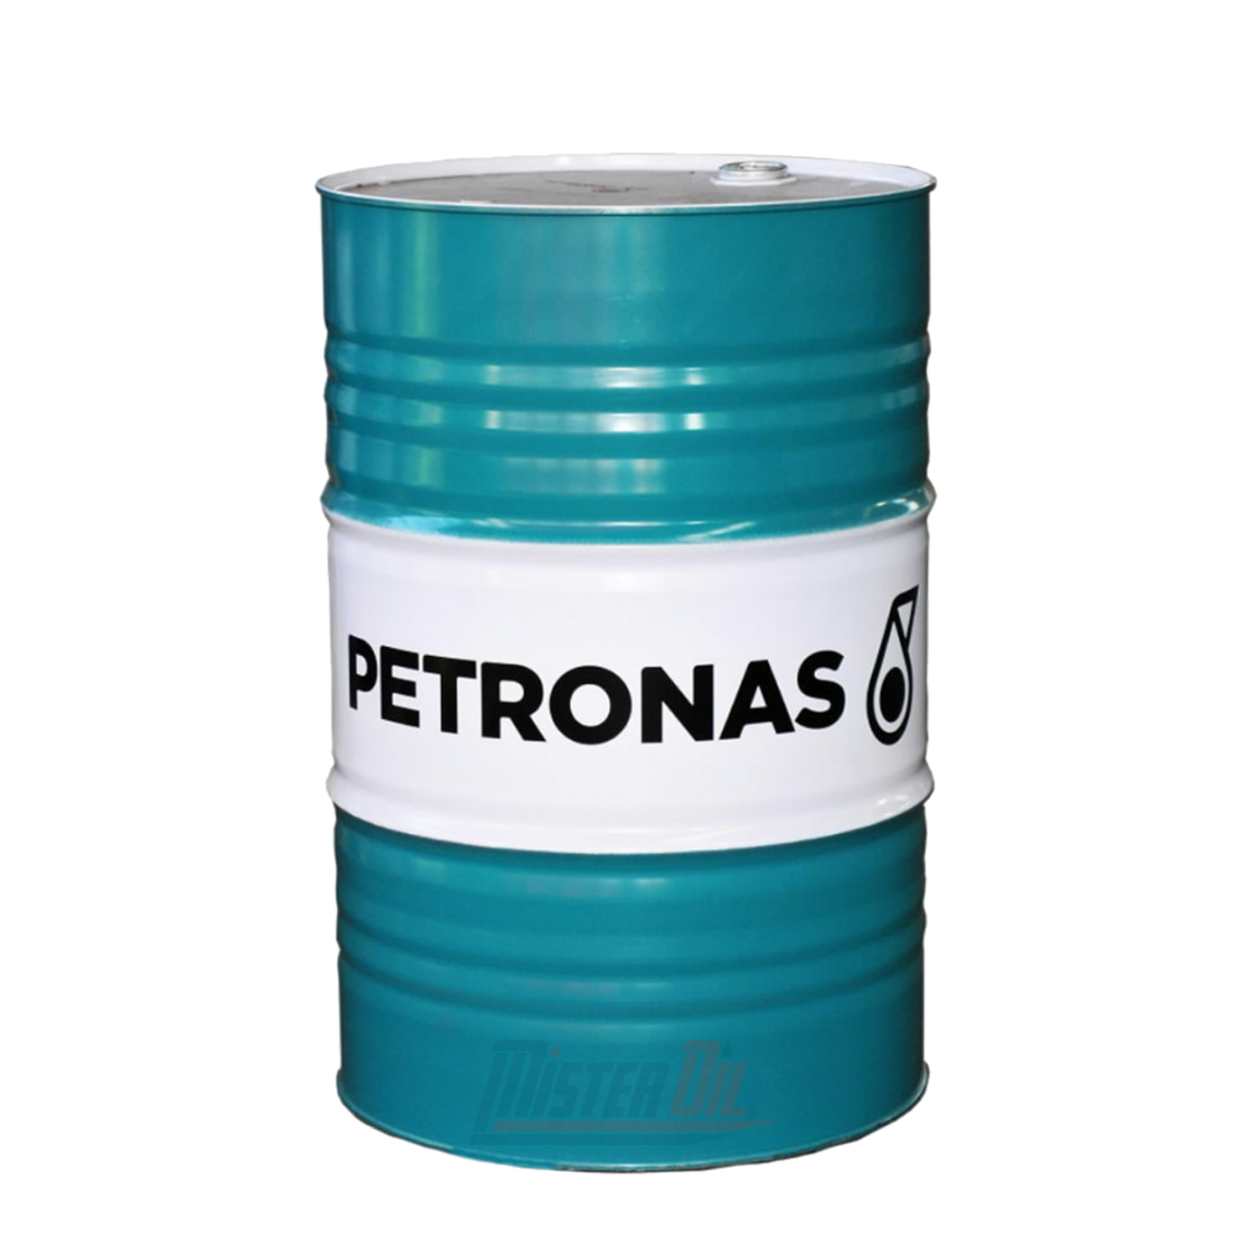 Petronas Syntium 800 EU  Leader in lubricants and additives I MisterOIl